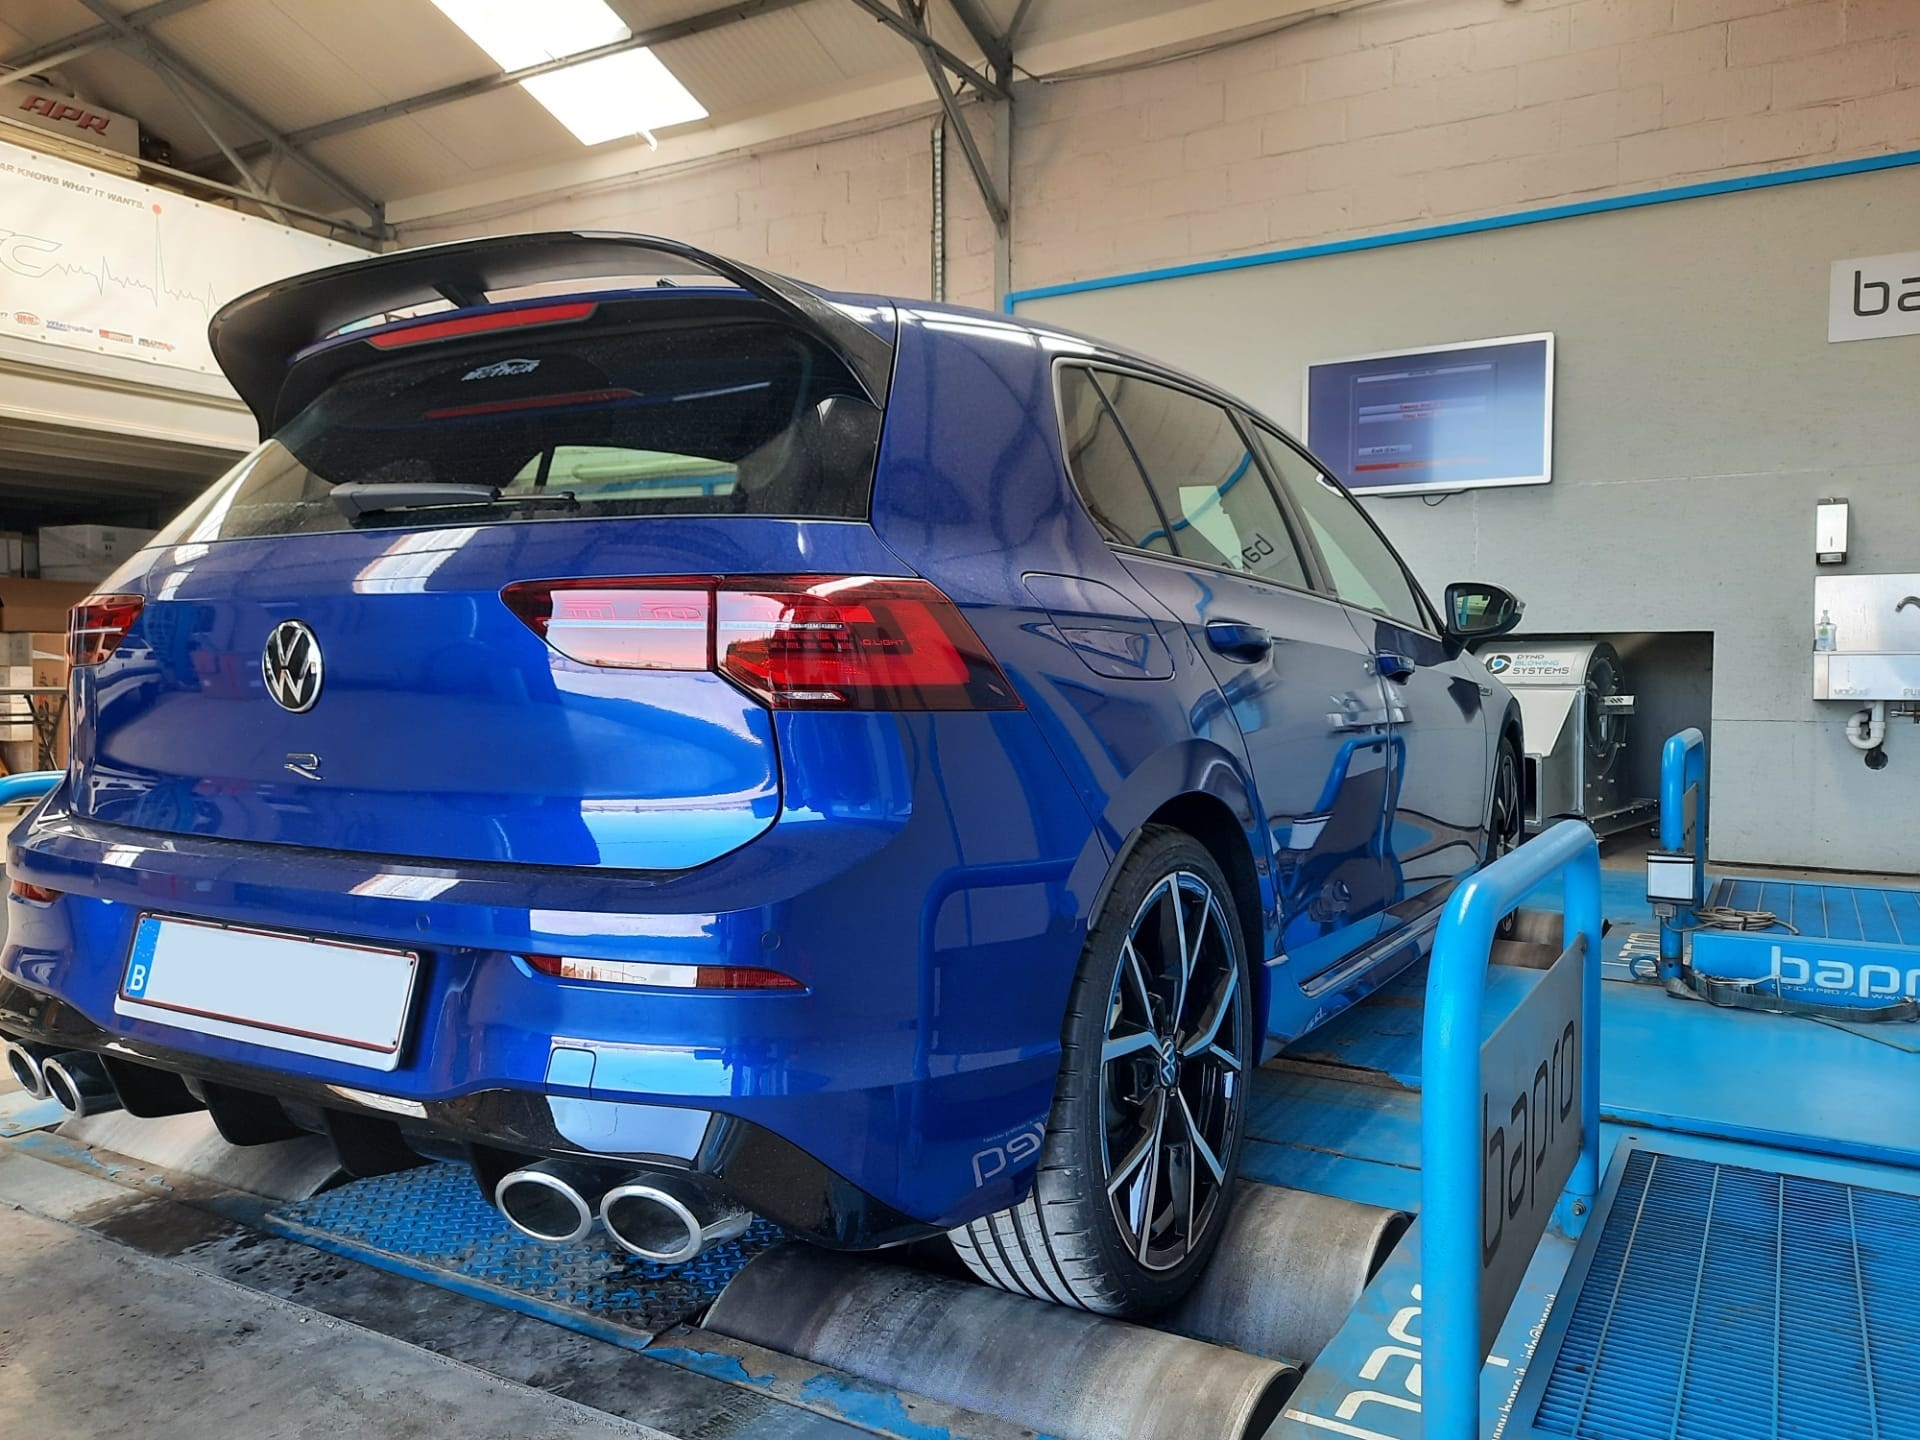 Our VW Golf 8R development car on the rollers